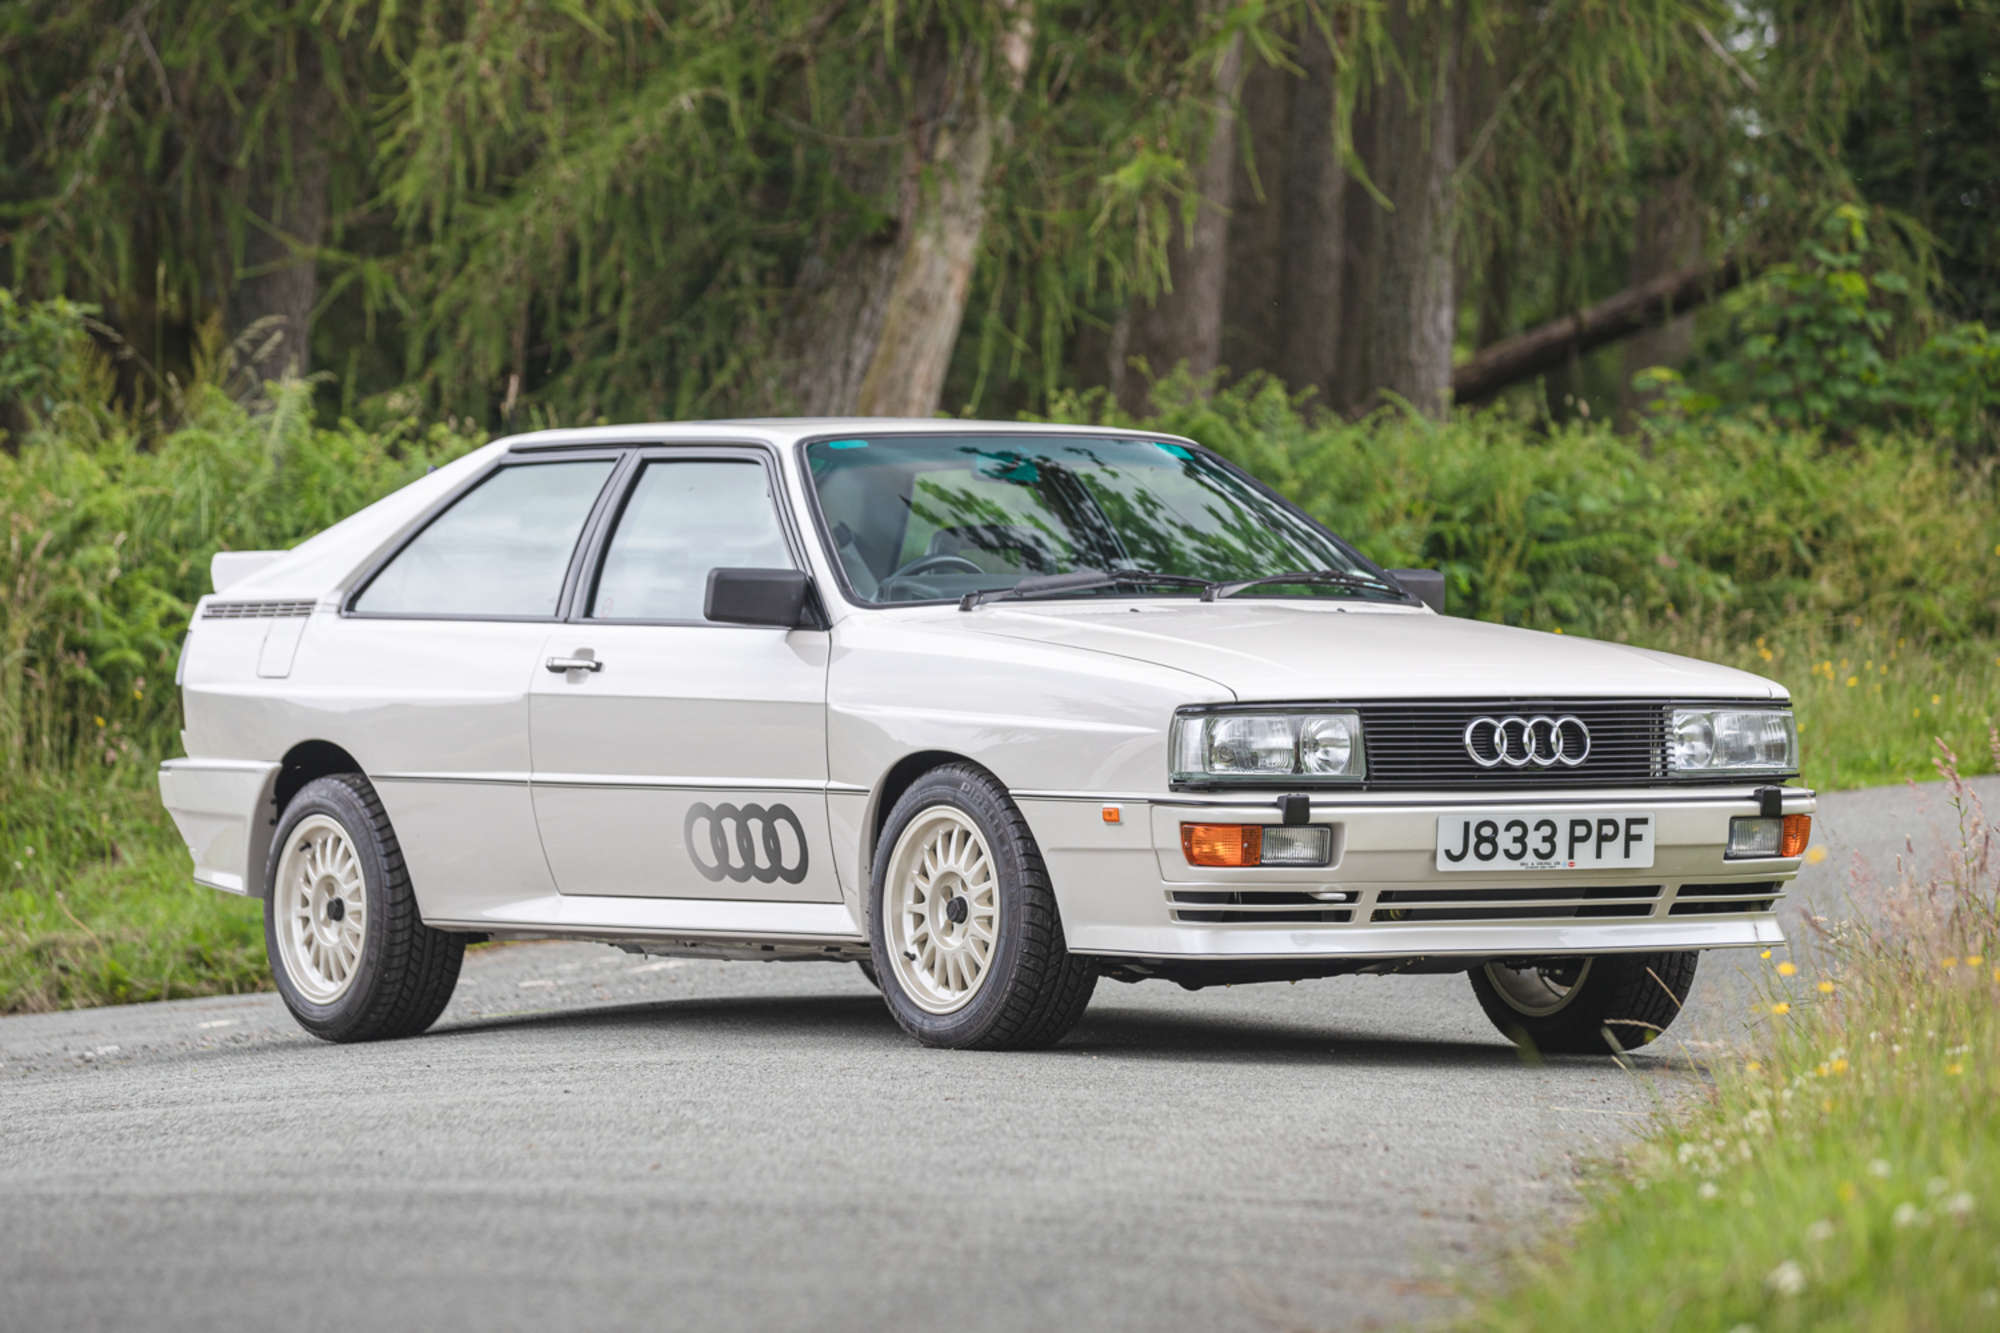 The Audi Quattro may be about to cross a major line in the sand